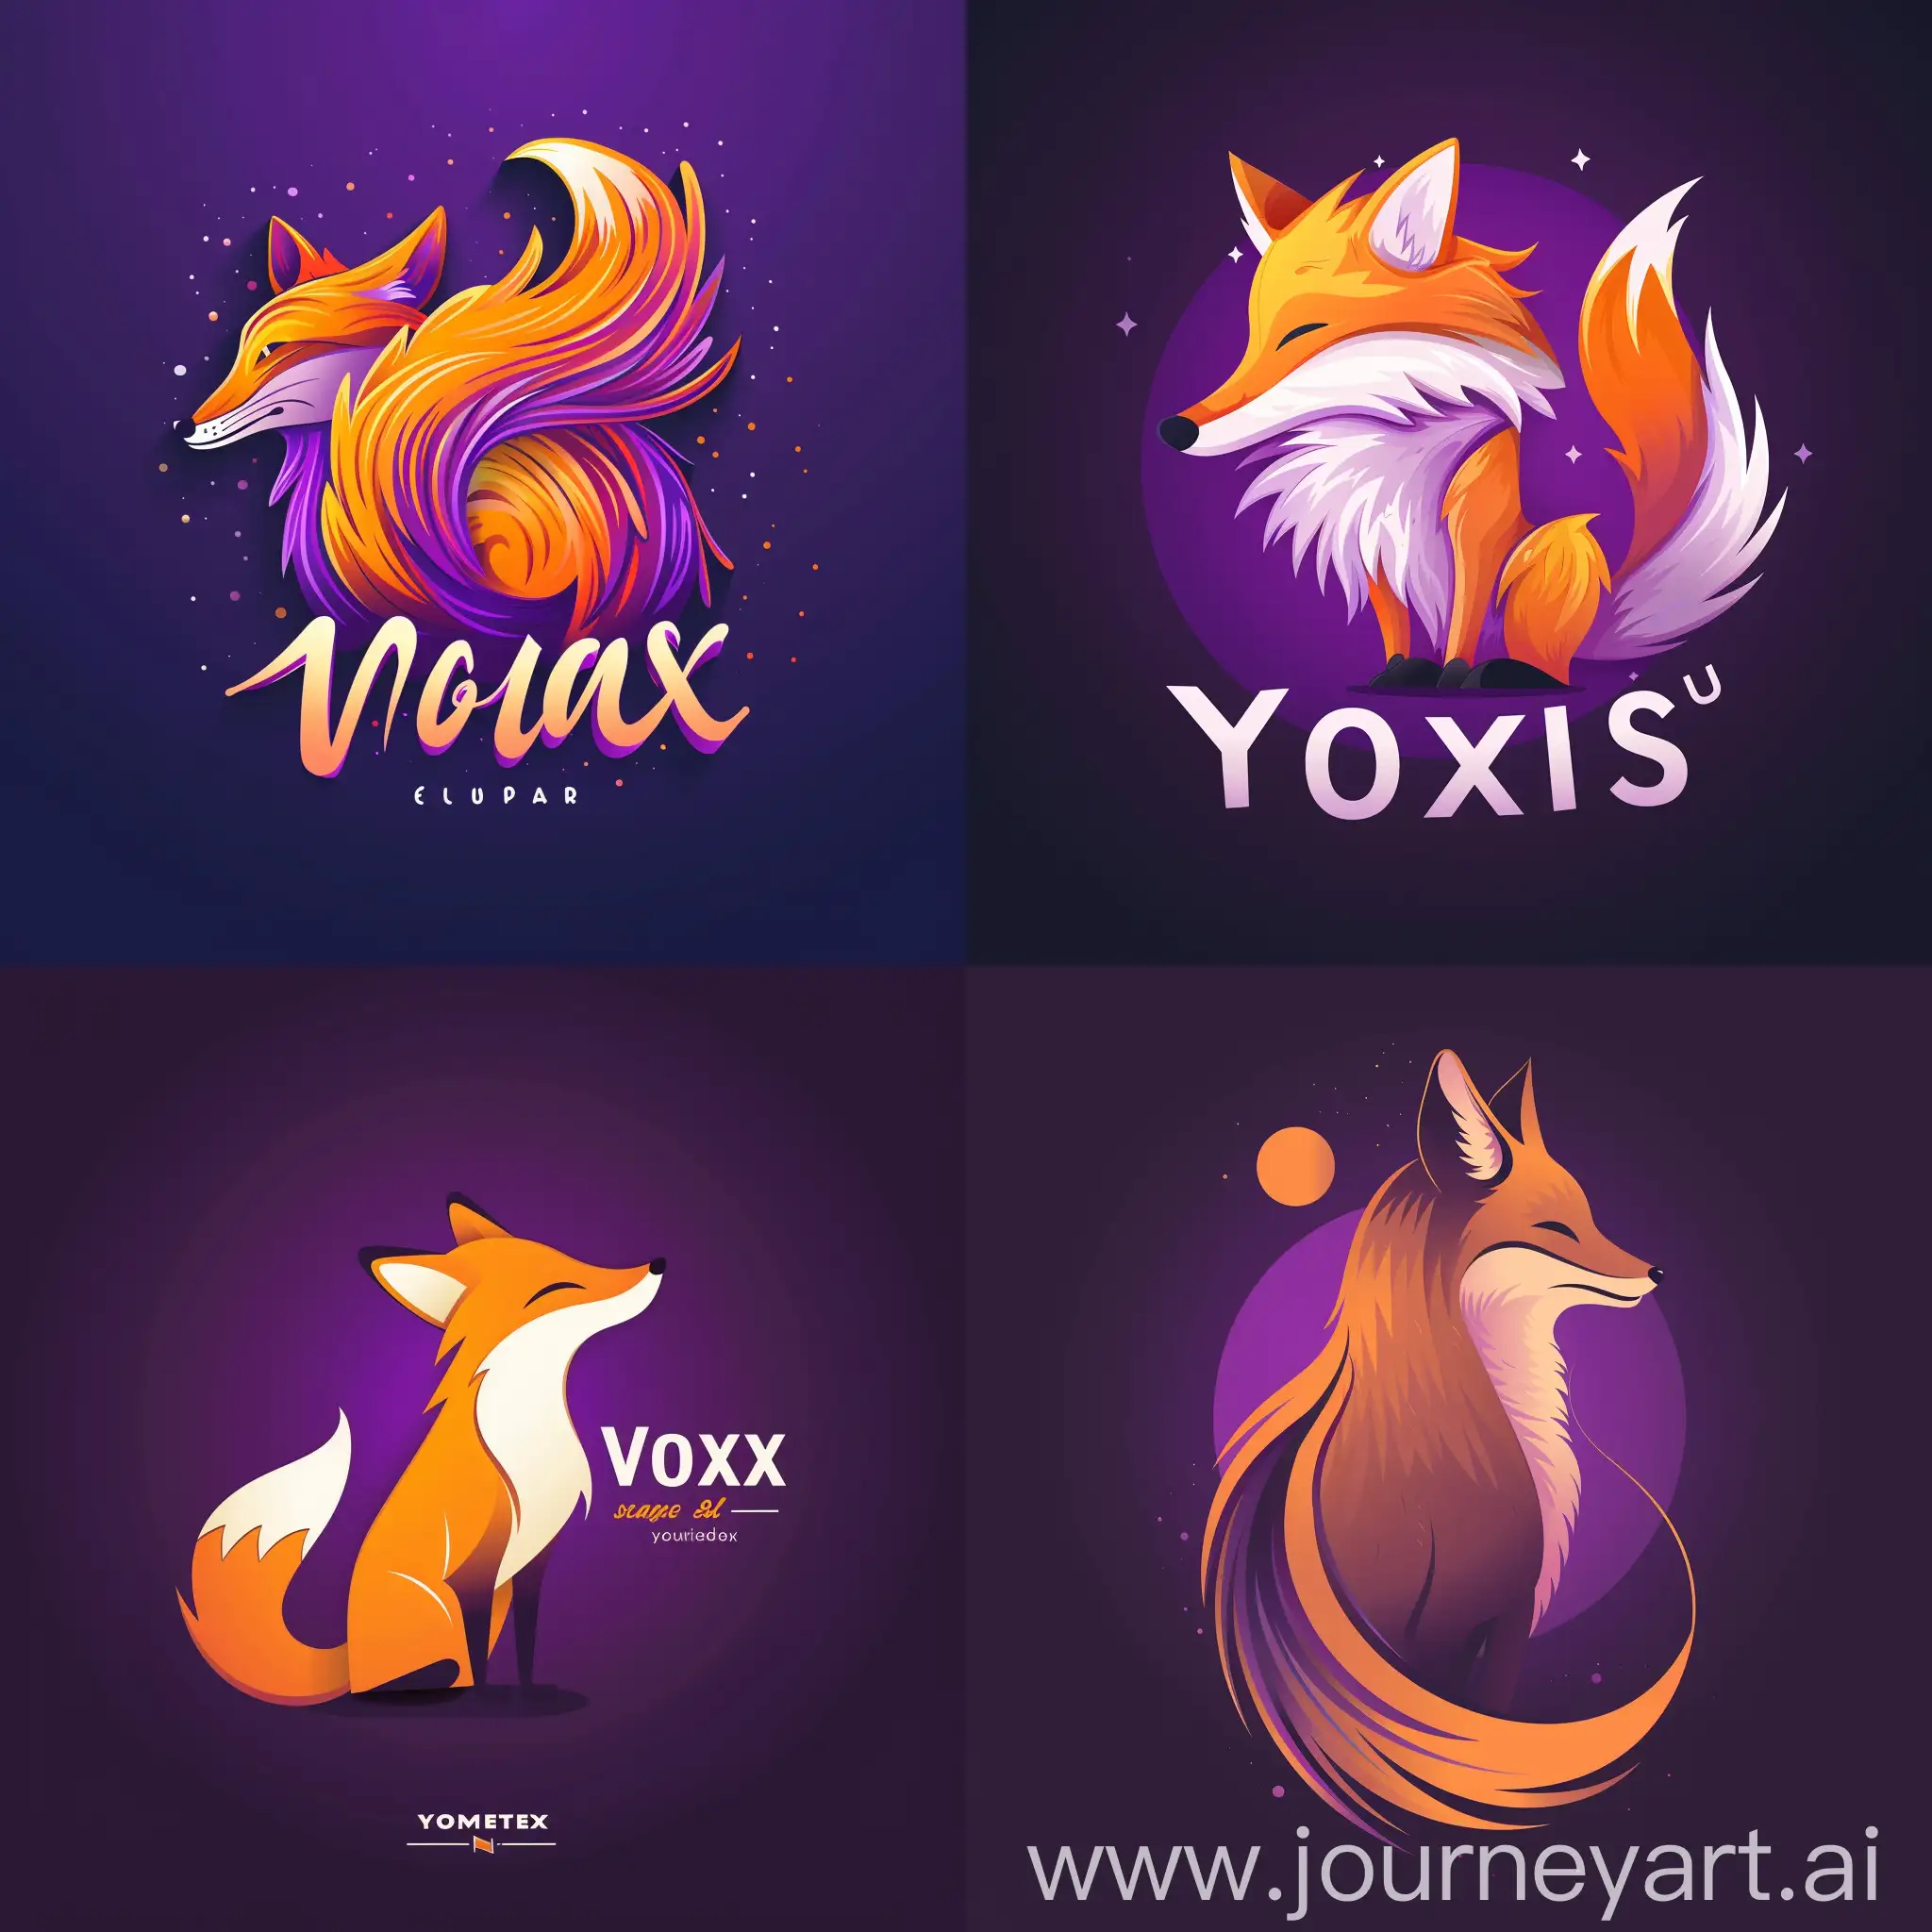 beatifull designed fox logo in purple background and with high detailed text 